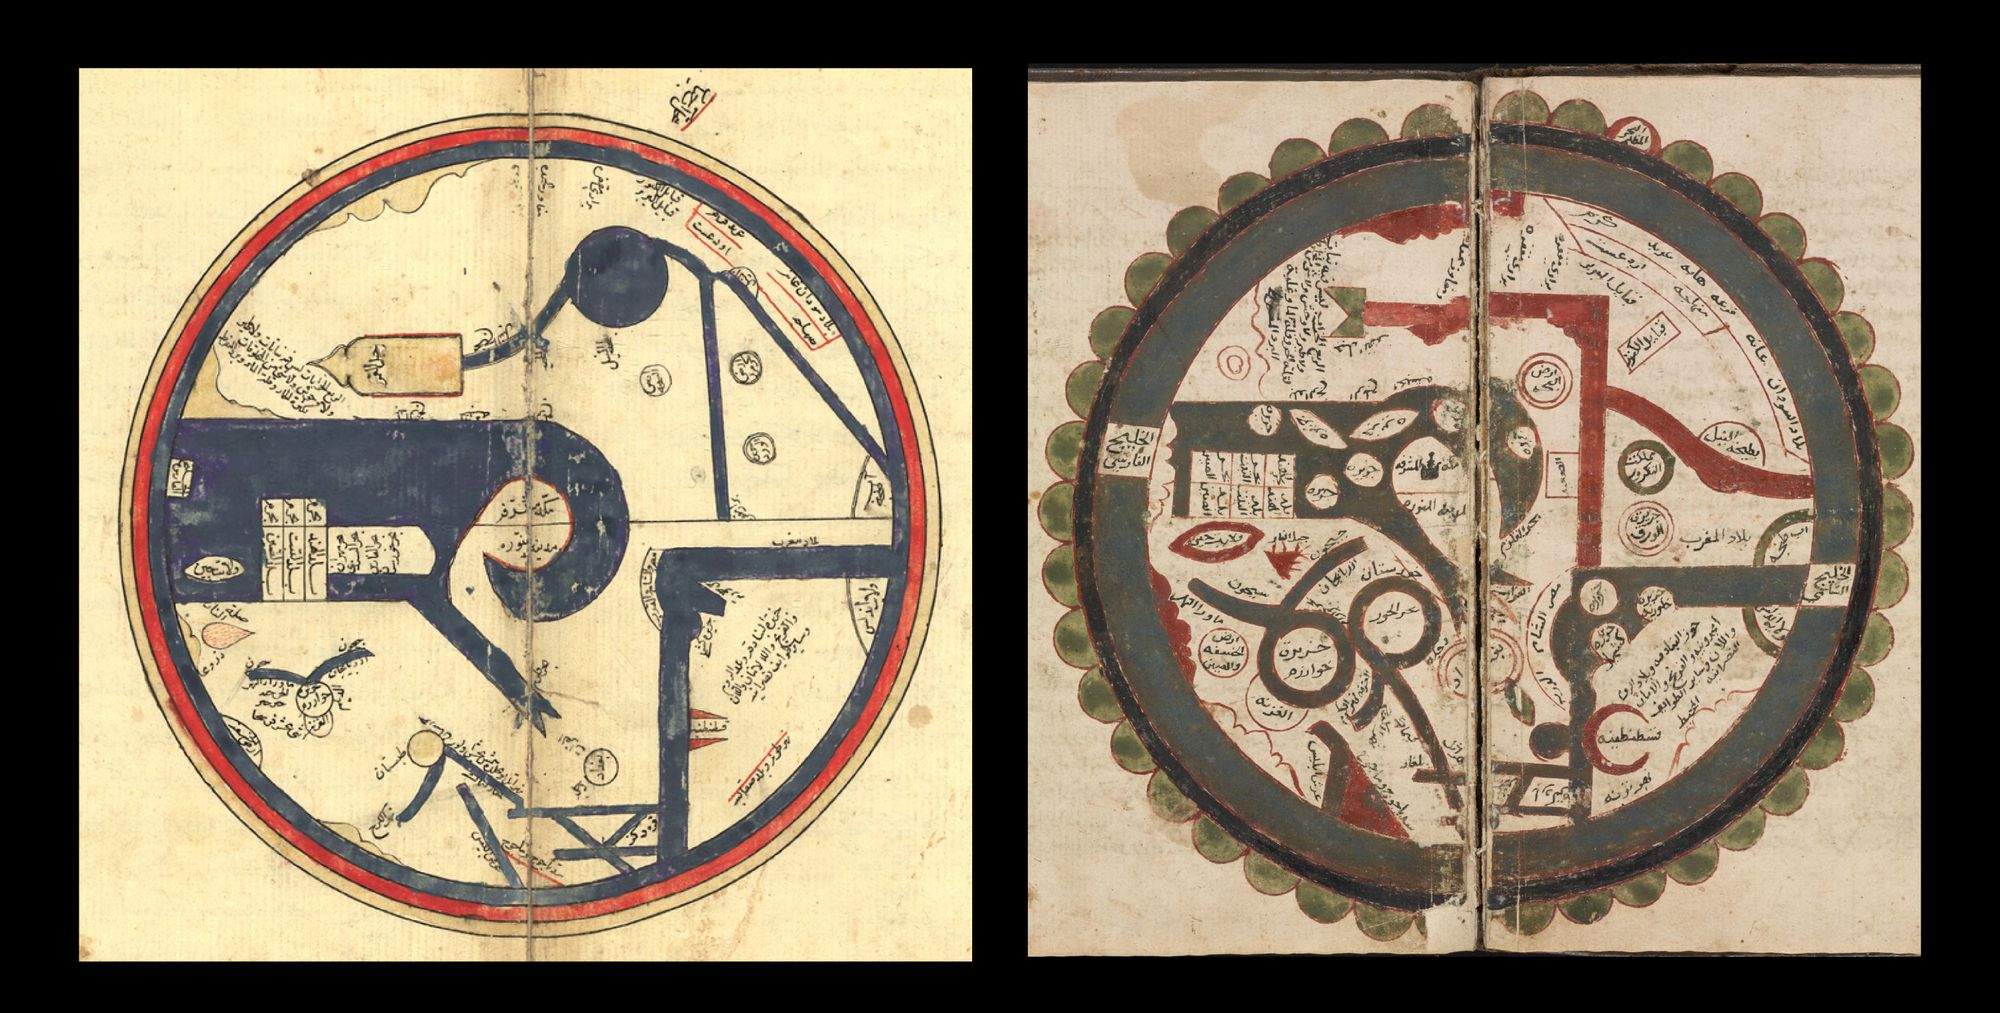 Two spreads from the old manuscript, showing round maps. The illustrations are quite abstract and minimalistic, depicting geographical features in geometrical forms.